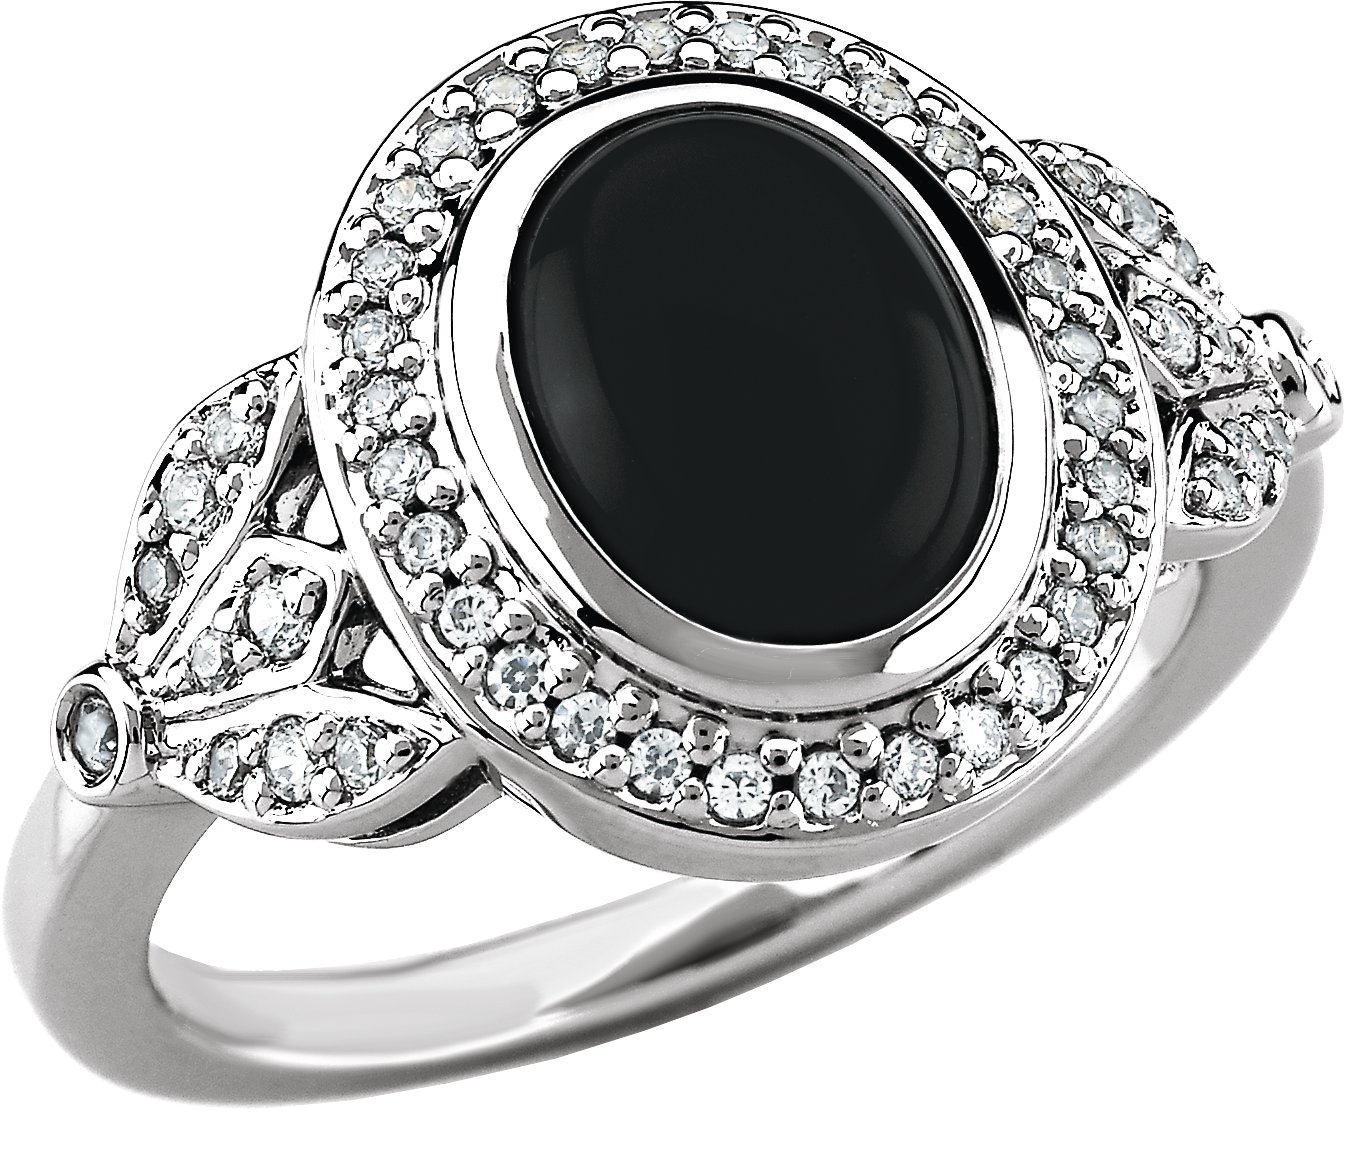 Vintage-Style Design Ring Mounting for Oval Gemstone and Diamonds